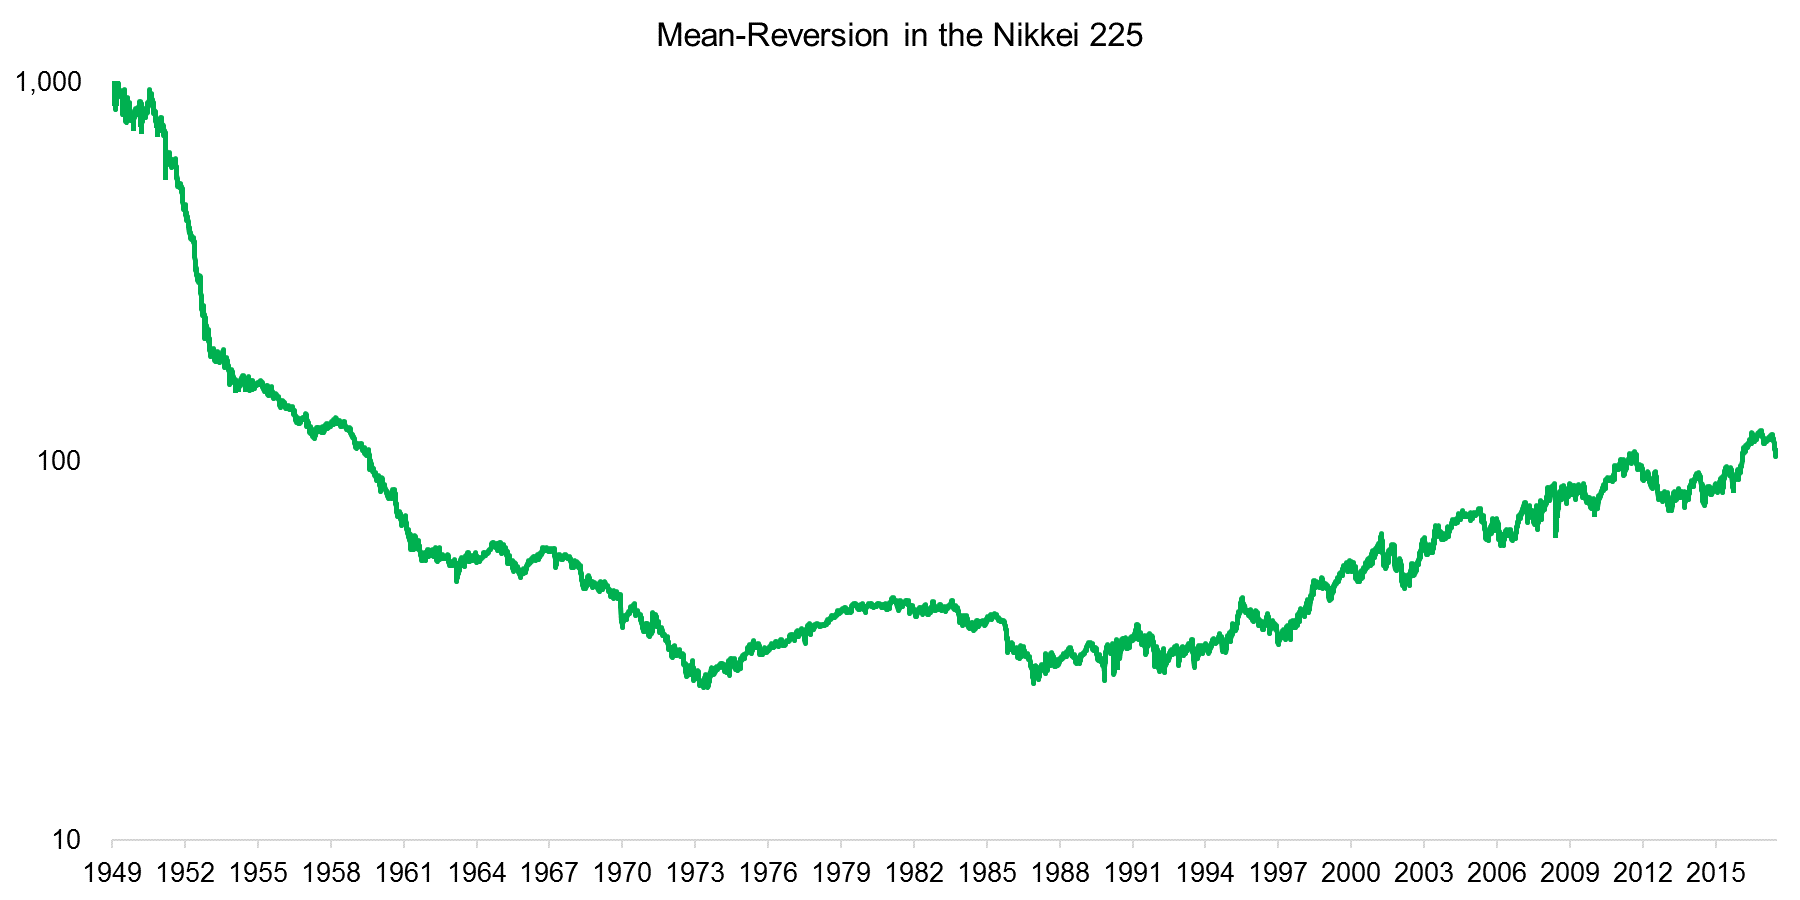 Mean-Reversion in the Nikkei 225